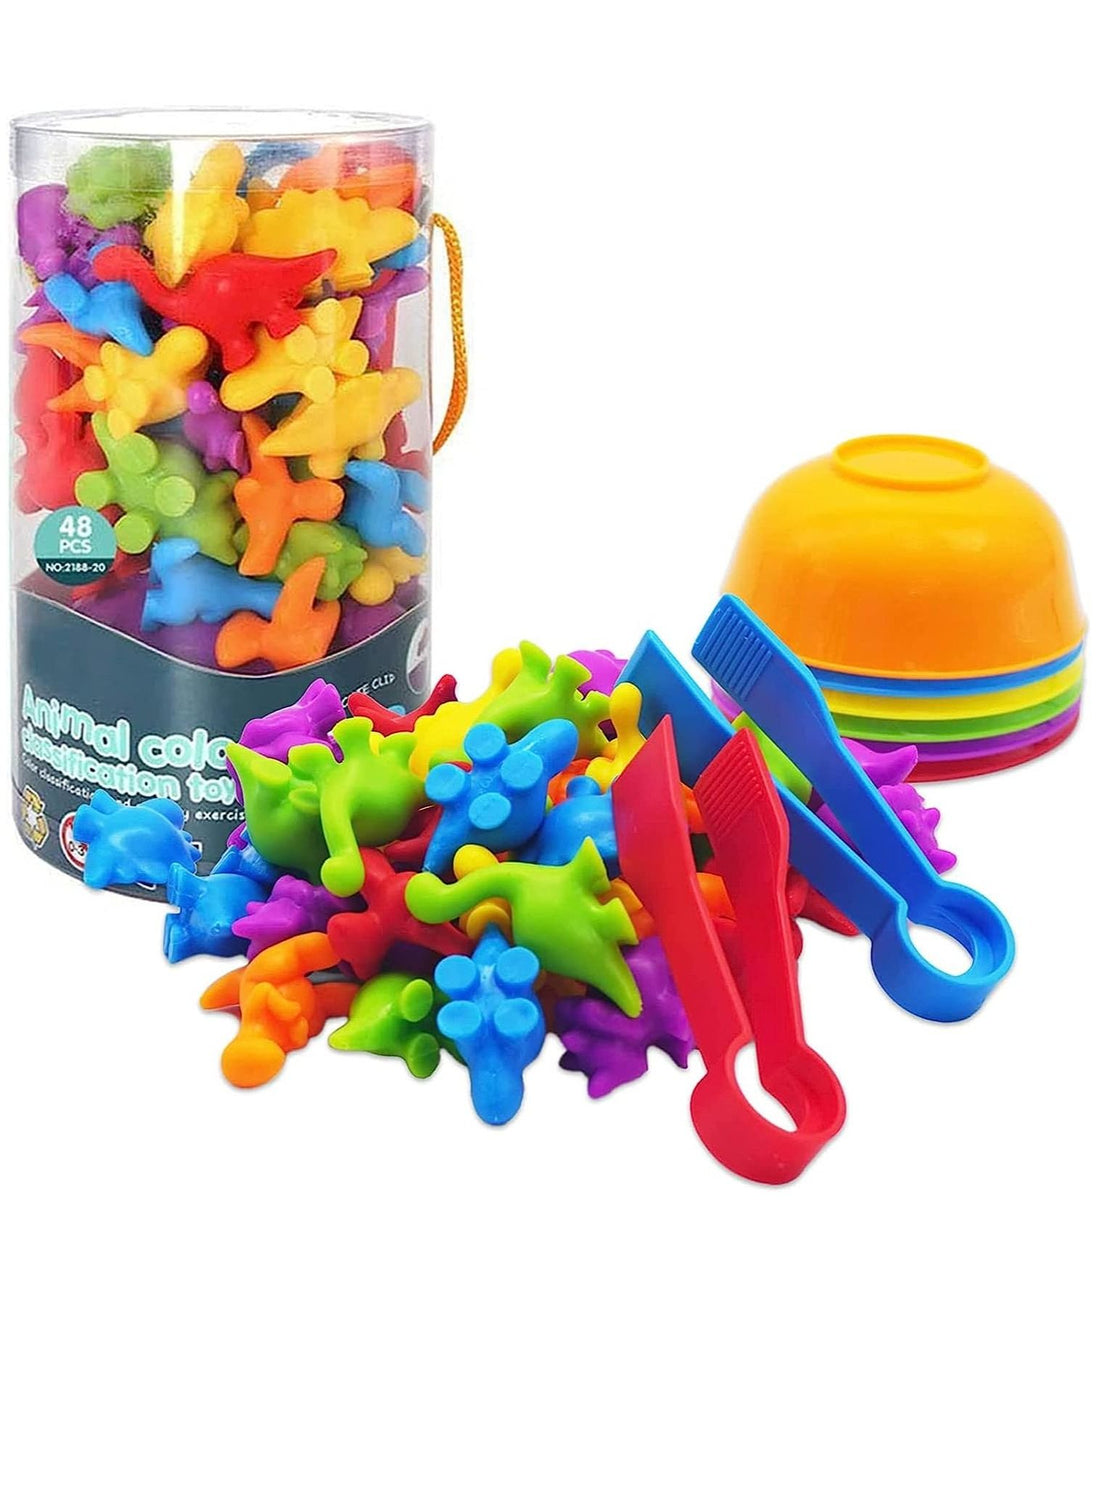 Counting Dinosaur Toys Matching Games with Sorting Cups